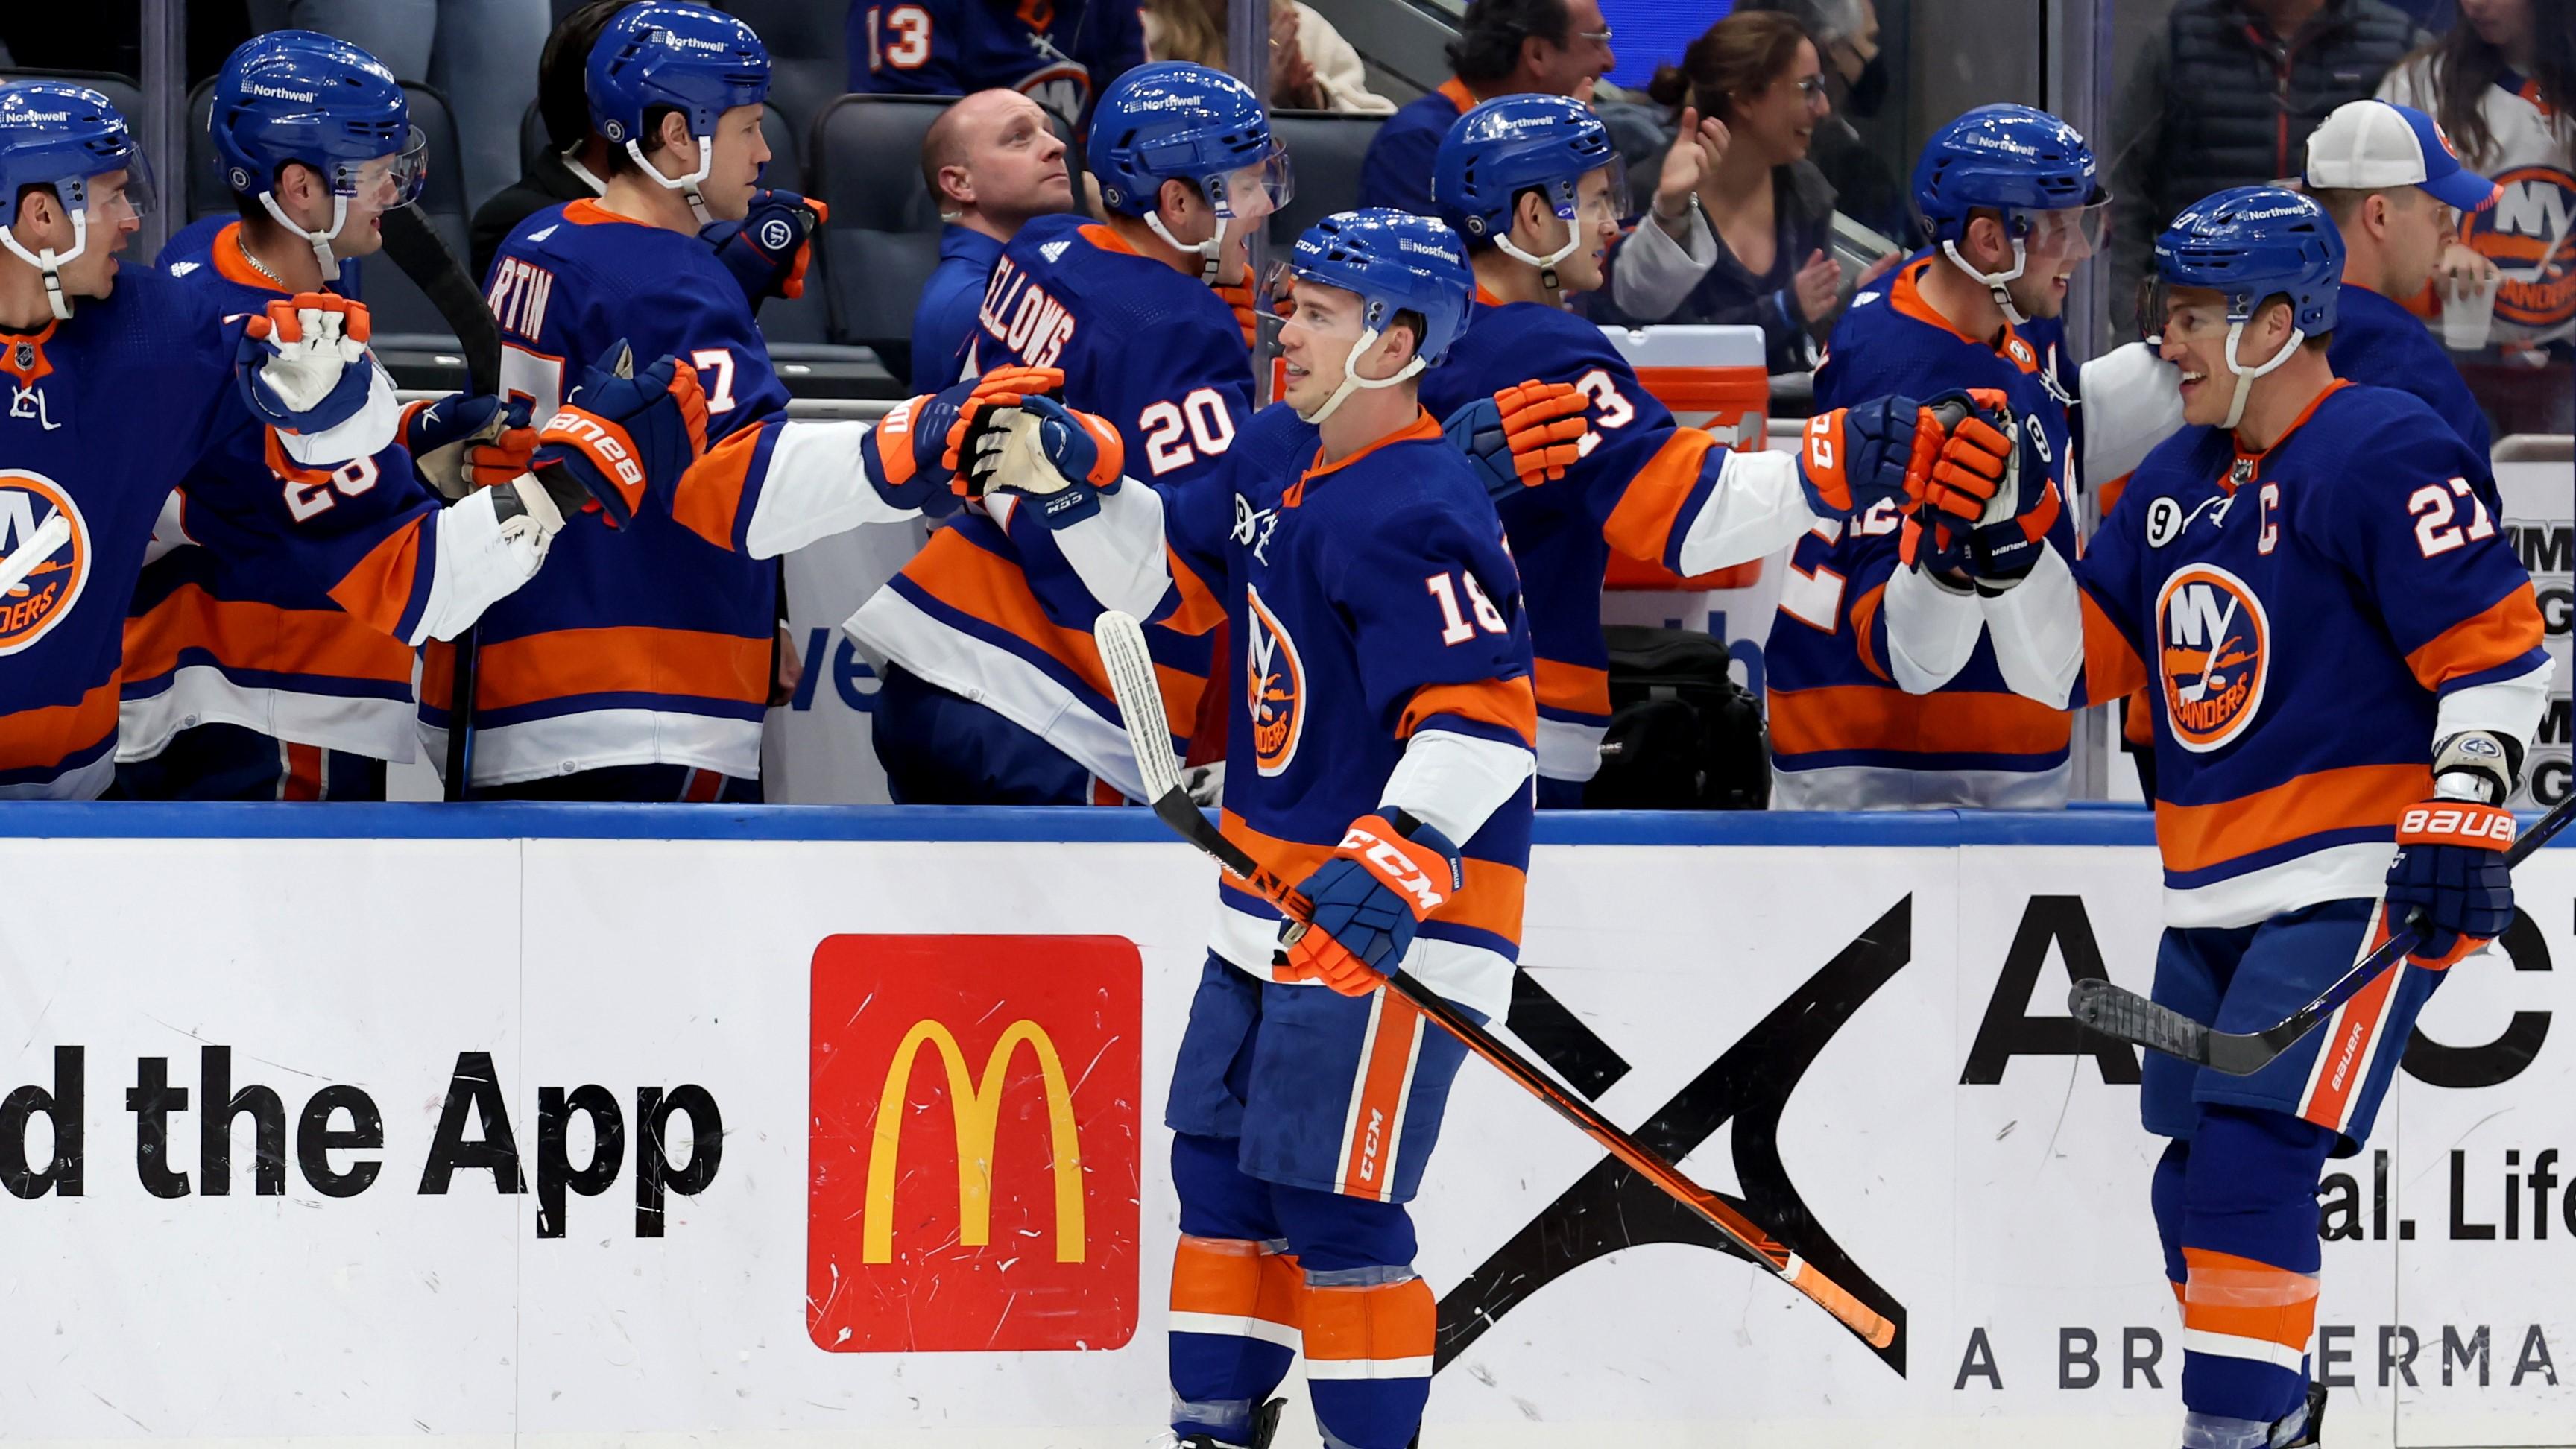 Mar 24, 2022; Elmont, New York, USA; New York Islanders left wing Anthony Beauvillier (18) celebrates his goal against the Detroit Red Wings with teammates during the first period at UBS Arena. / Brad Penner-USA TODAY Sports